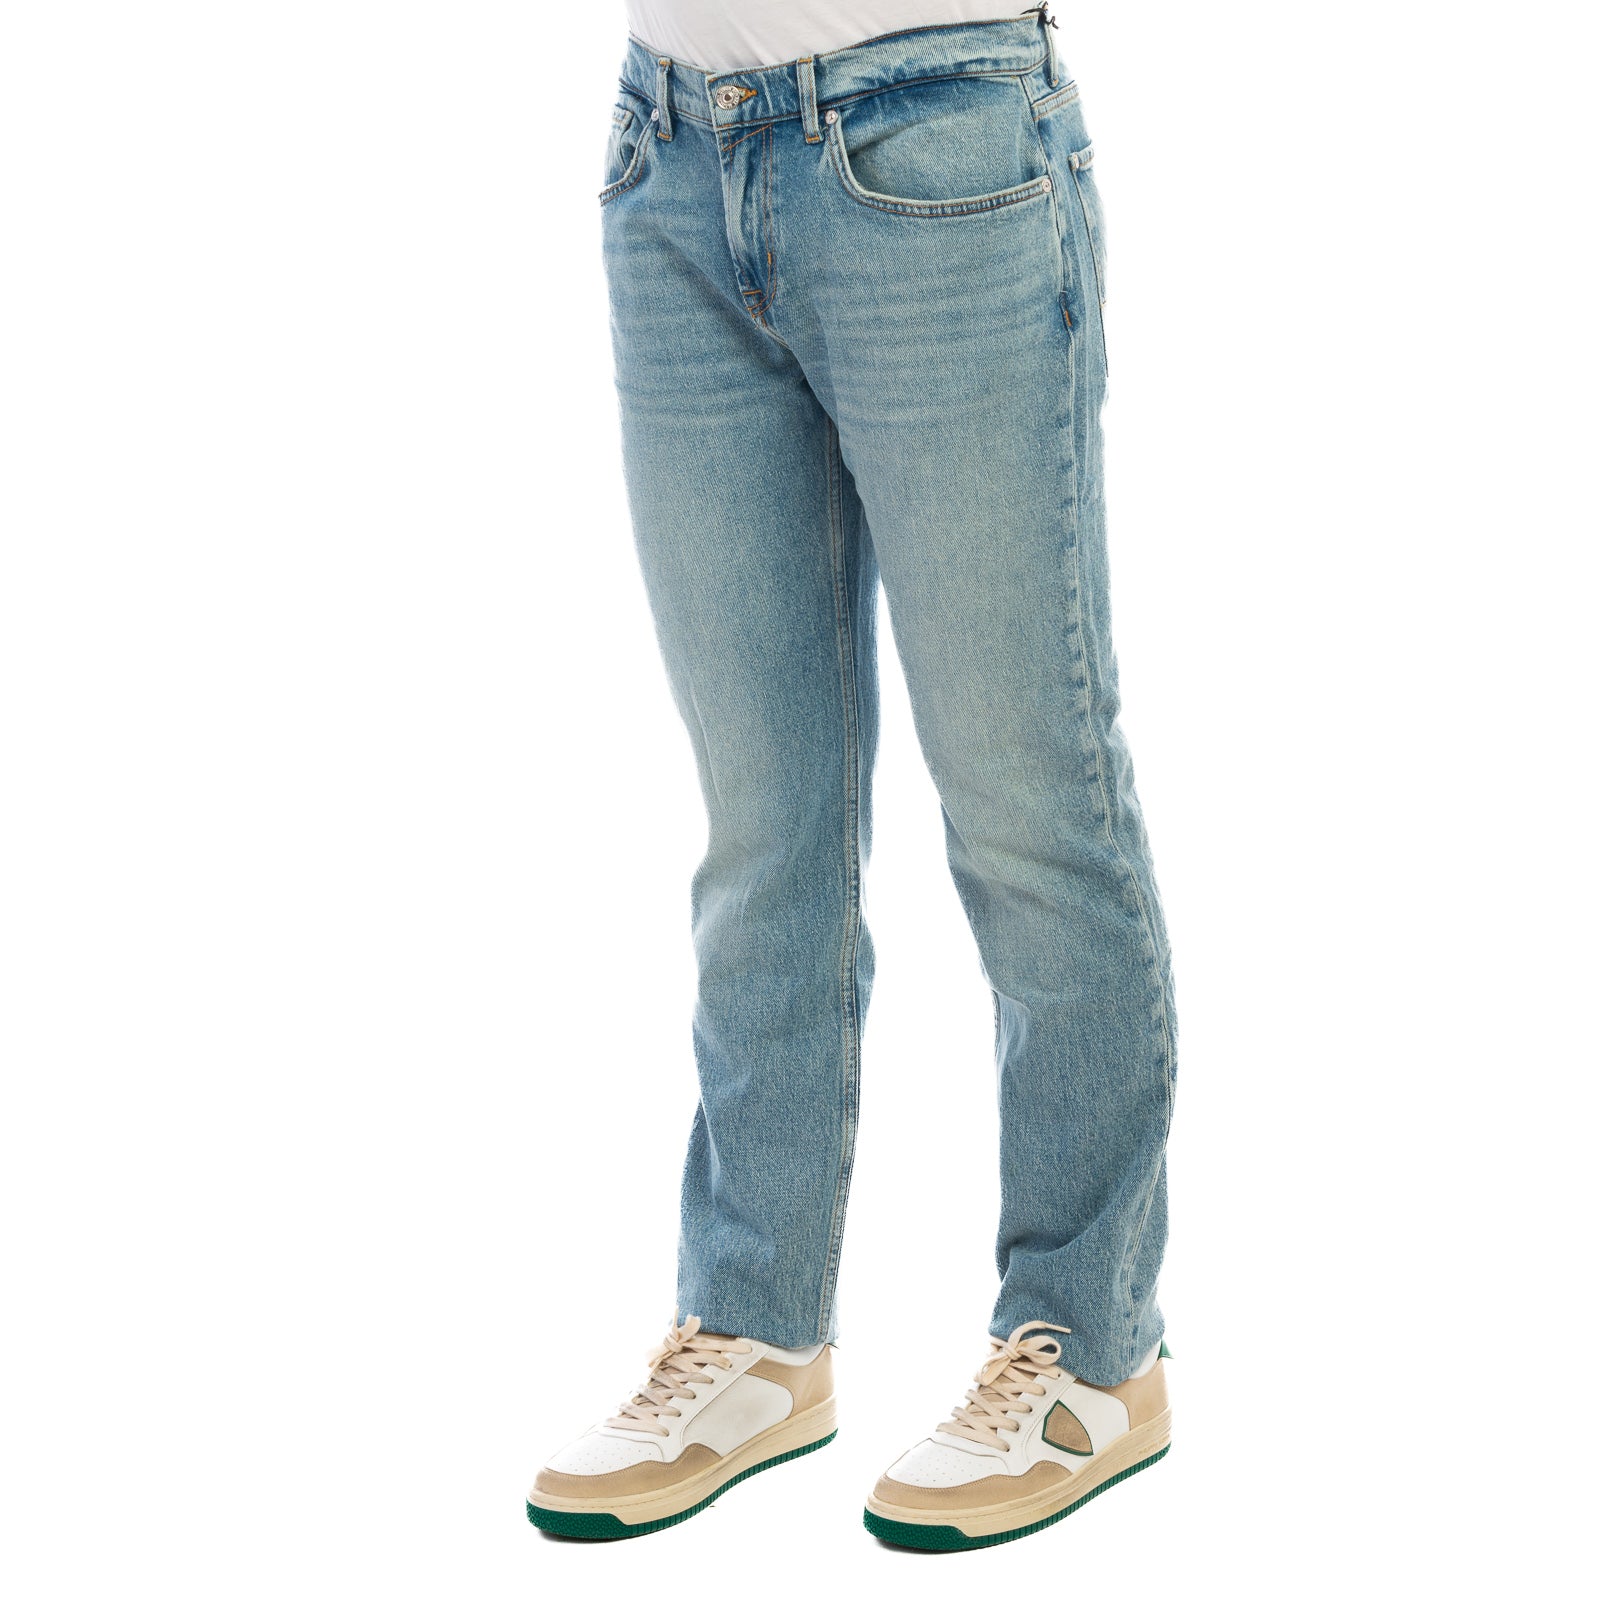 Jeans 7 FOR ALL MANKIND
Light blue